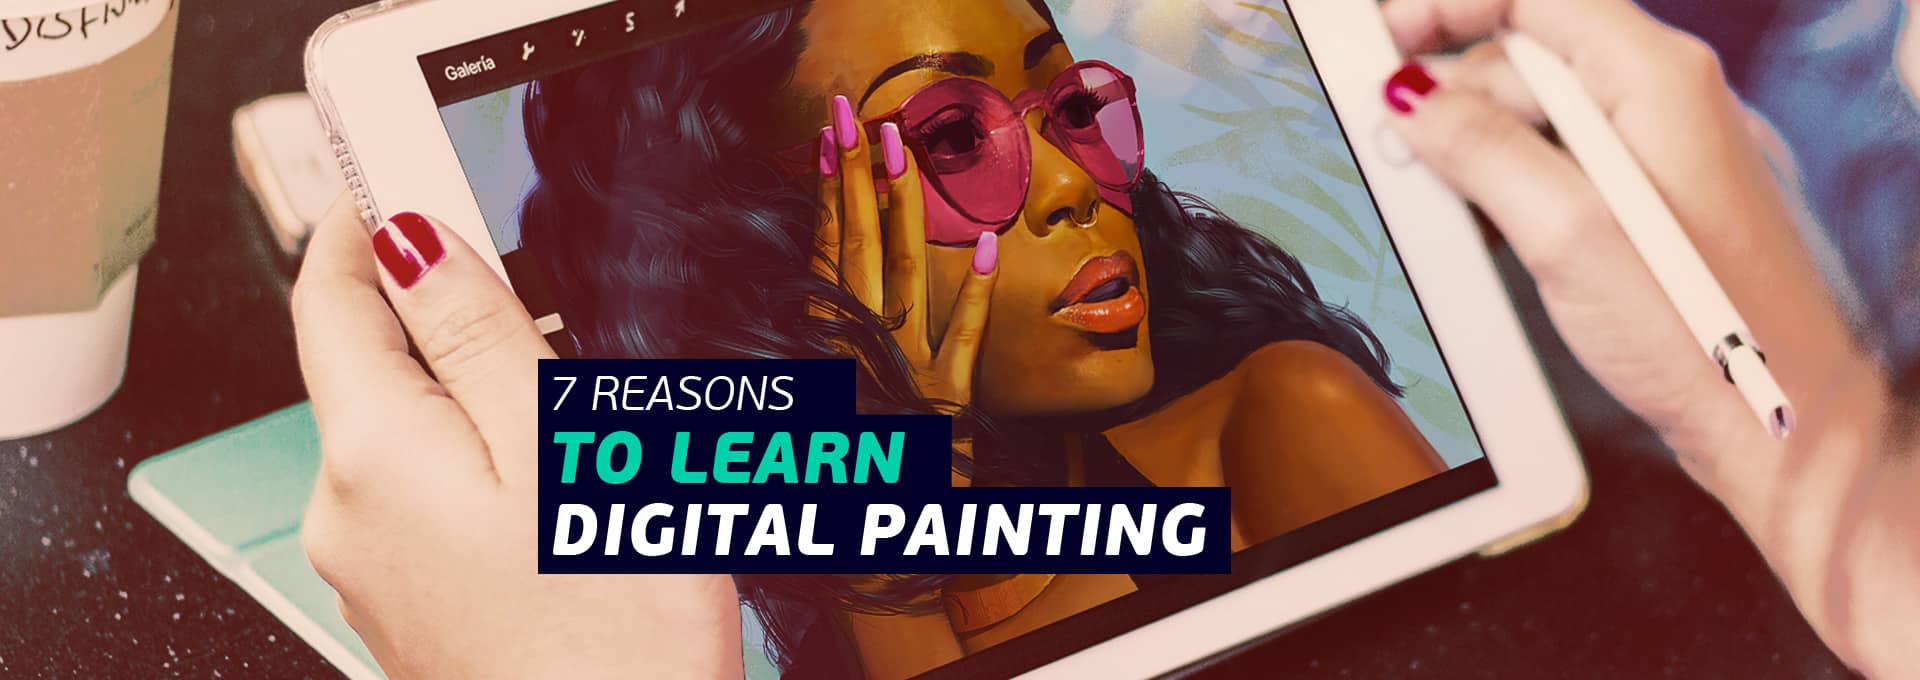 Reasons to learn digital painting this year